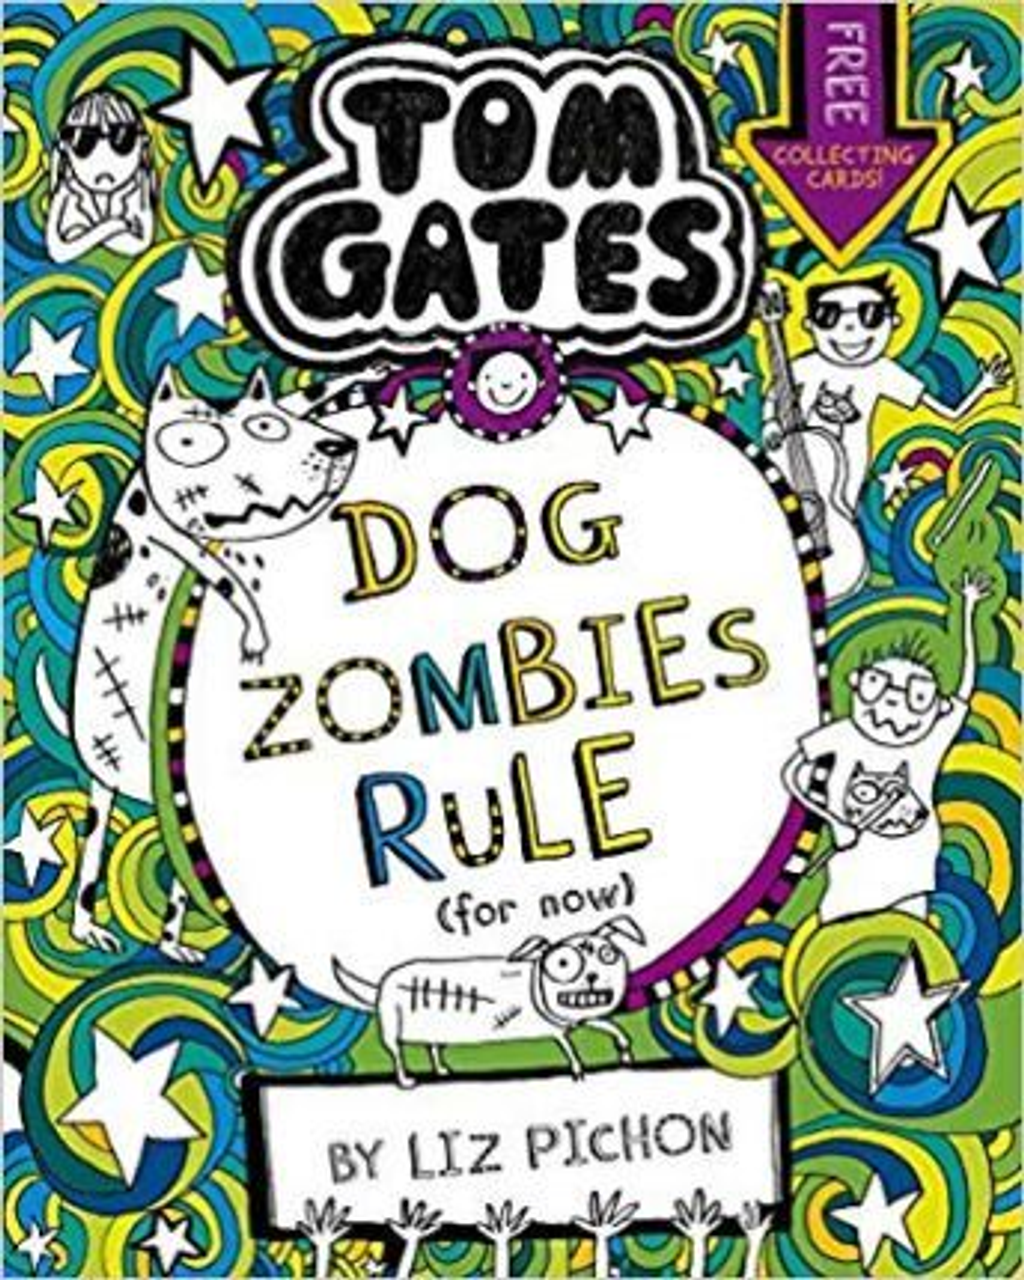 Liz Pichon / DogZombies Rule ( For now...) (Large Paperback) ( Tom Gates Series - Book 11)